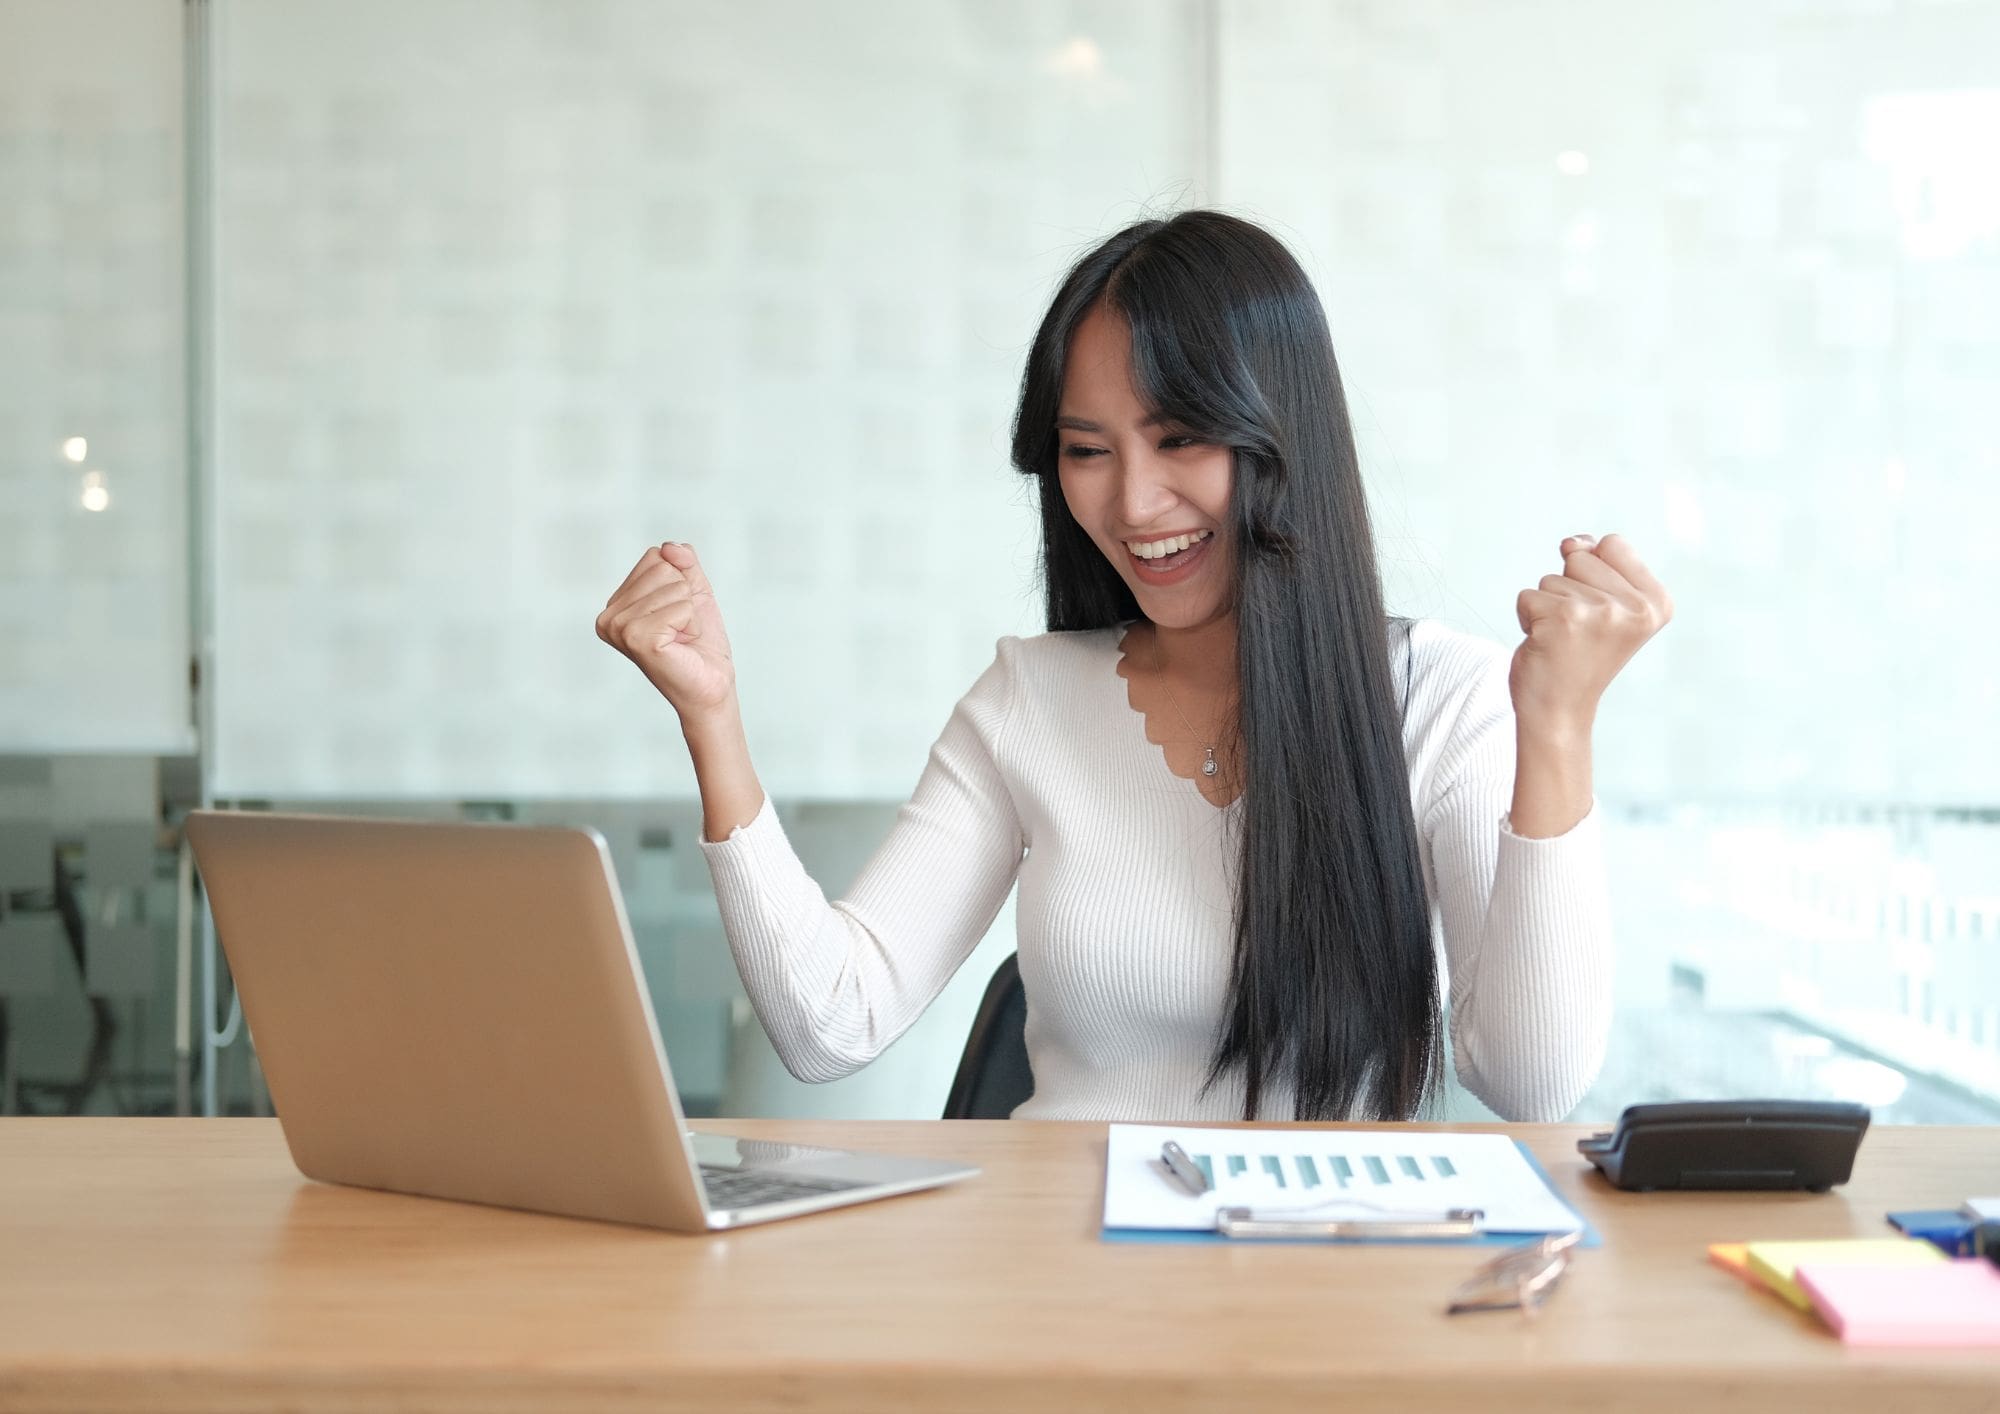 A businesswoman in an office celebrating a win in front of a laptop.